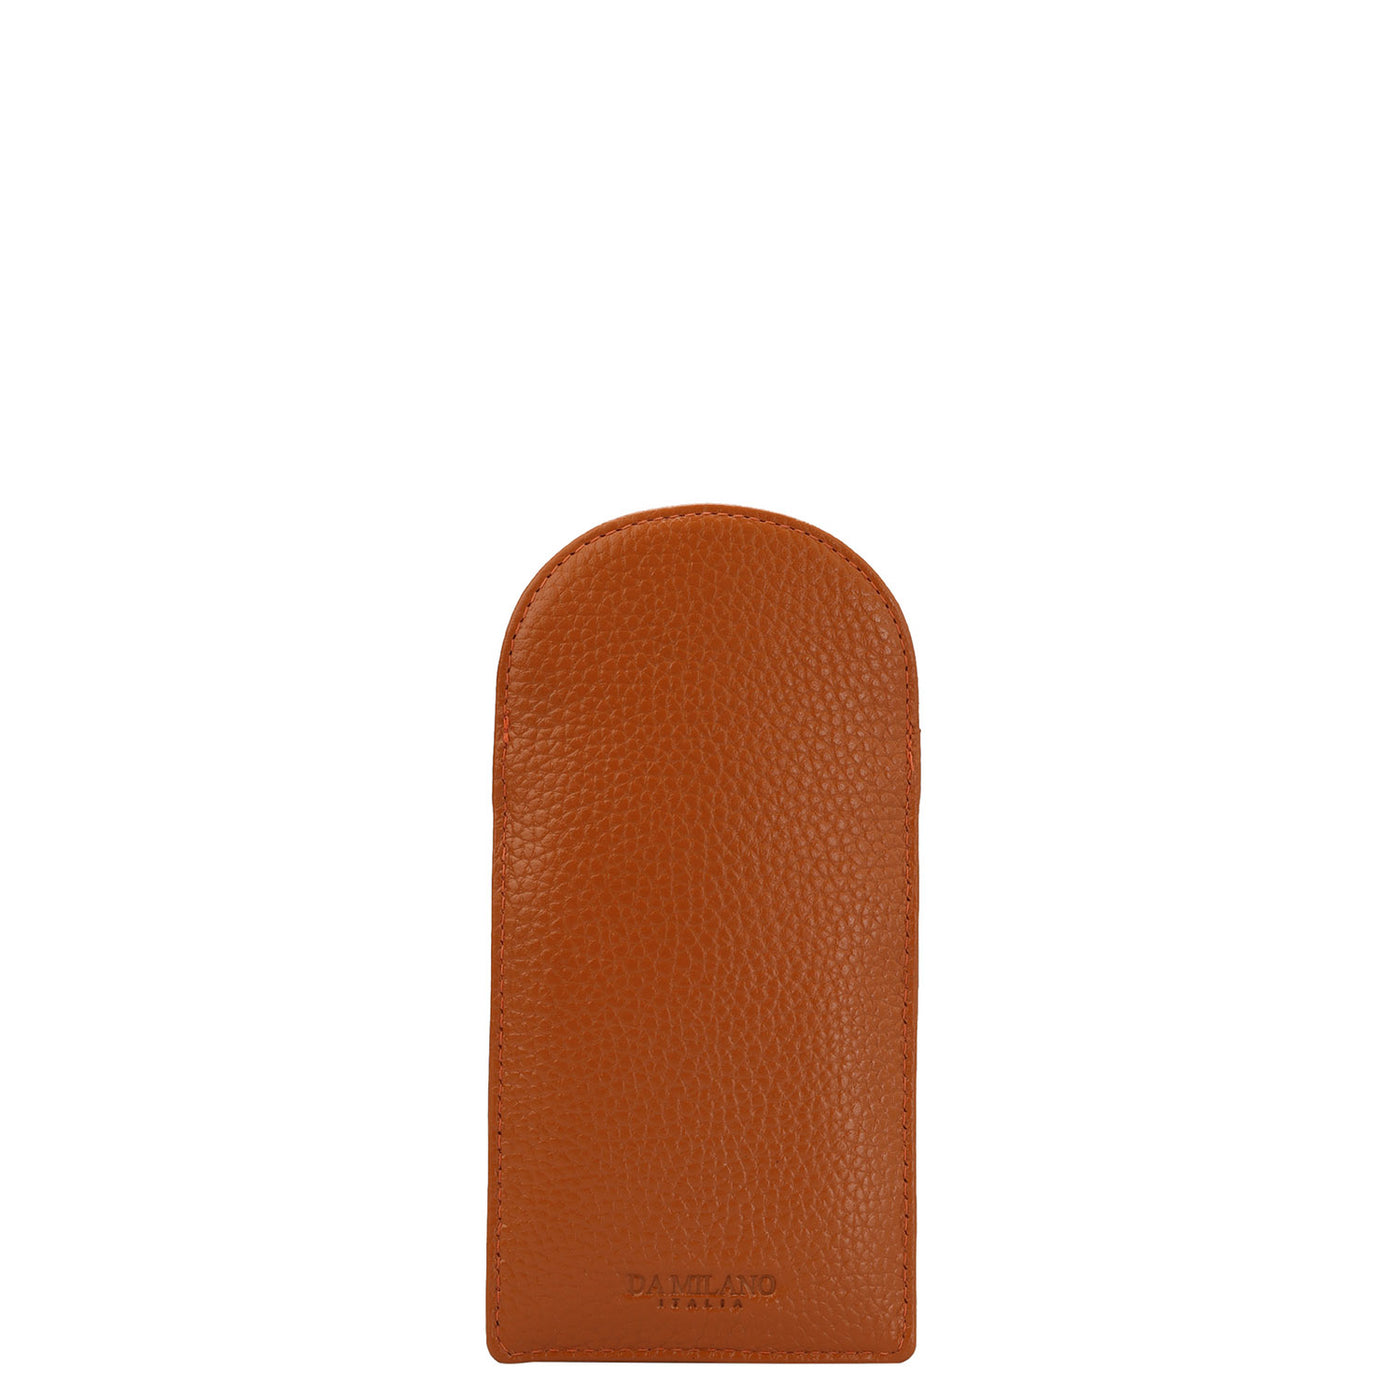 Wax Leather Spectacle Case - Orange